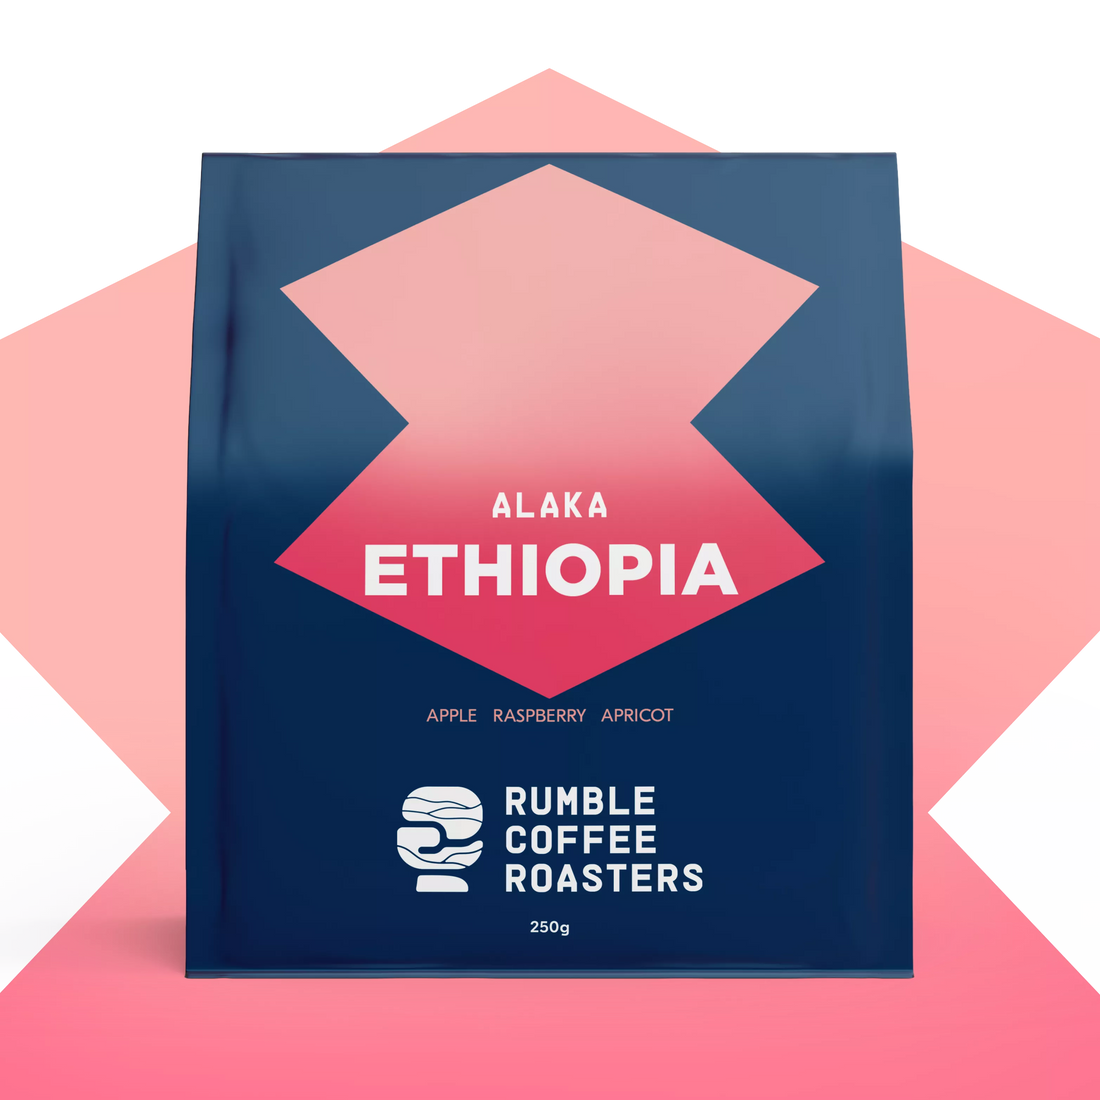 A digital mockup of a bag of coffee, with Rumble Coffee Roasters on the front.